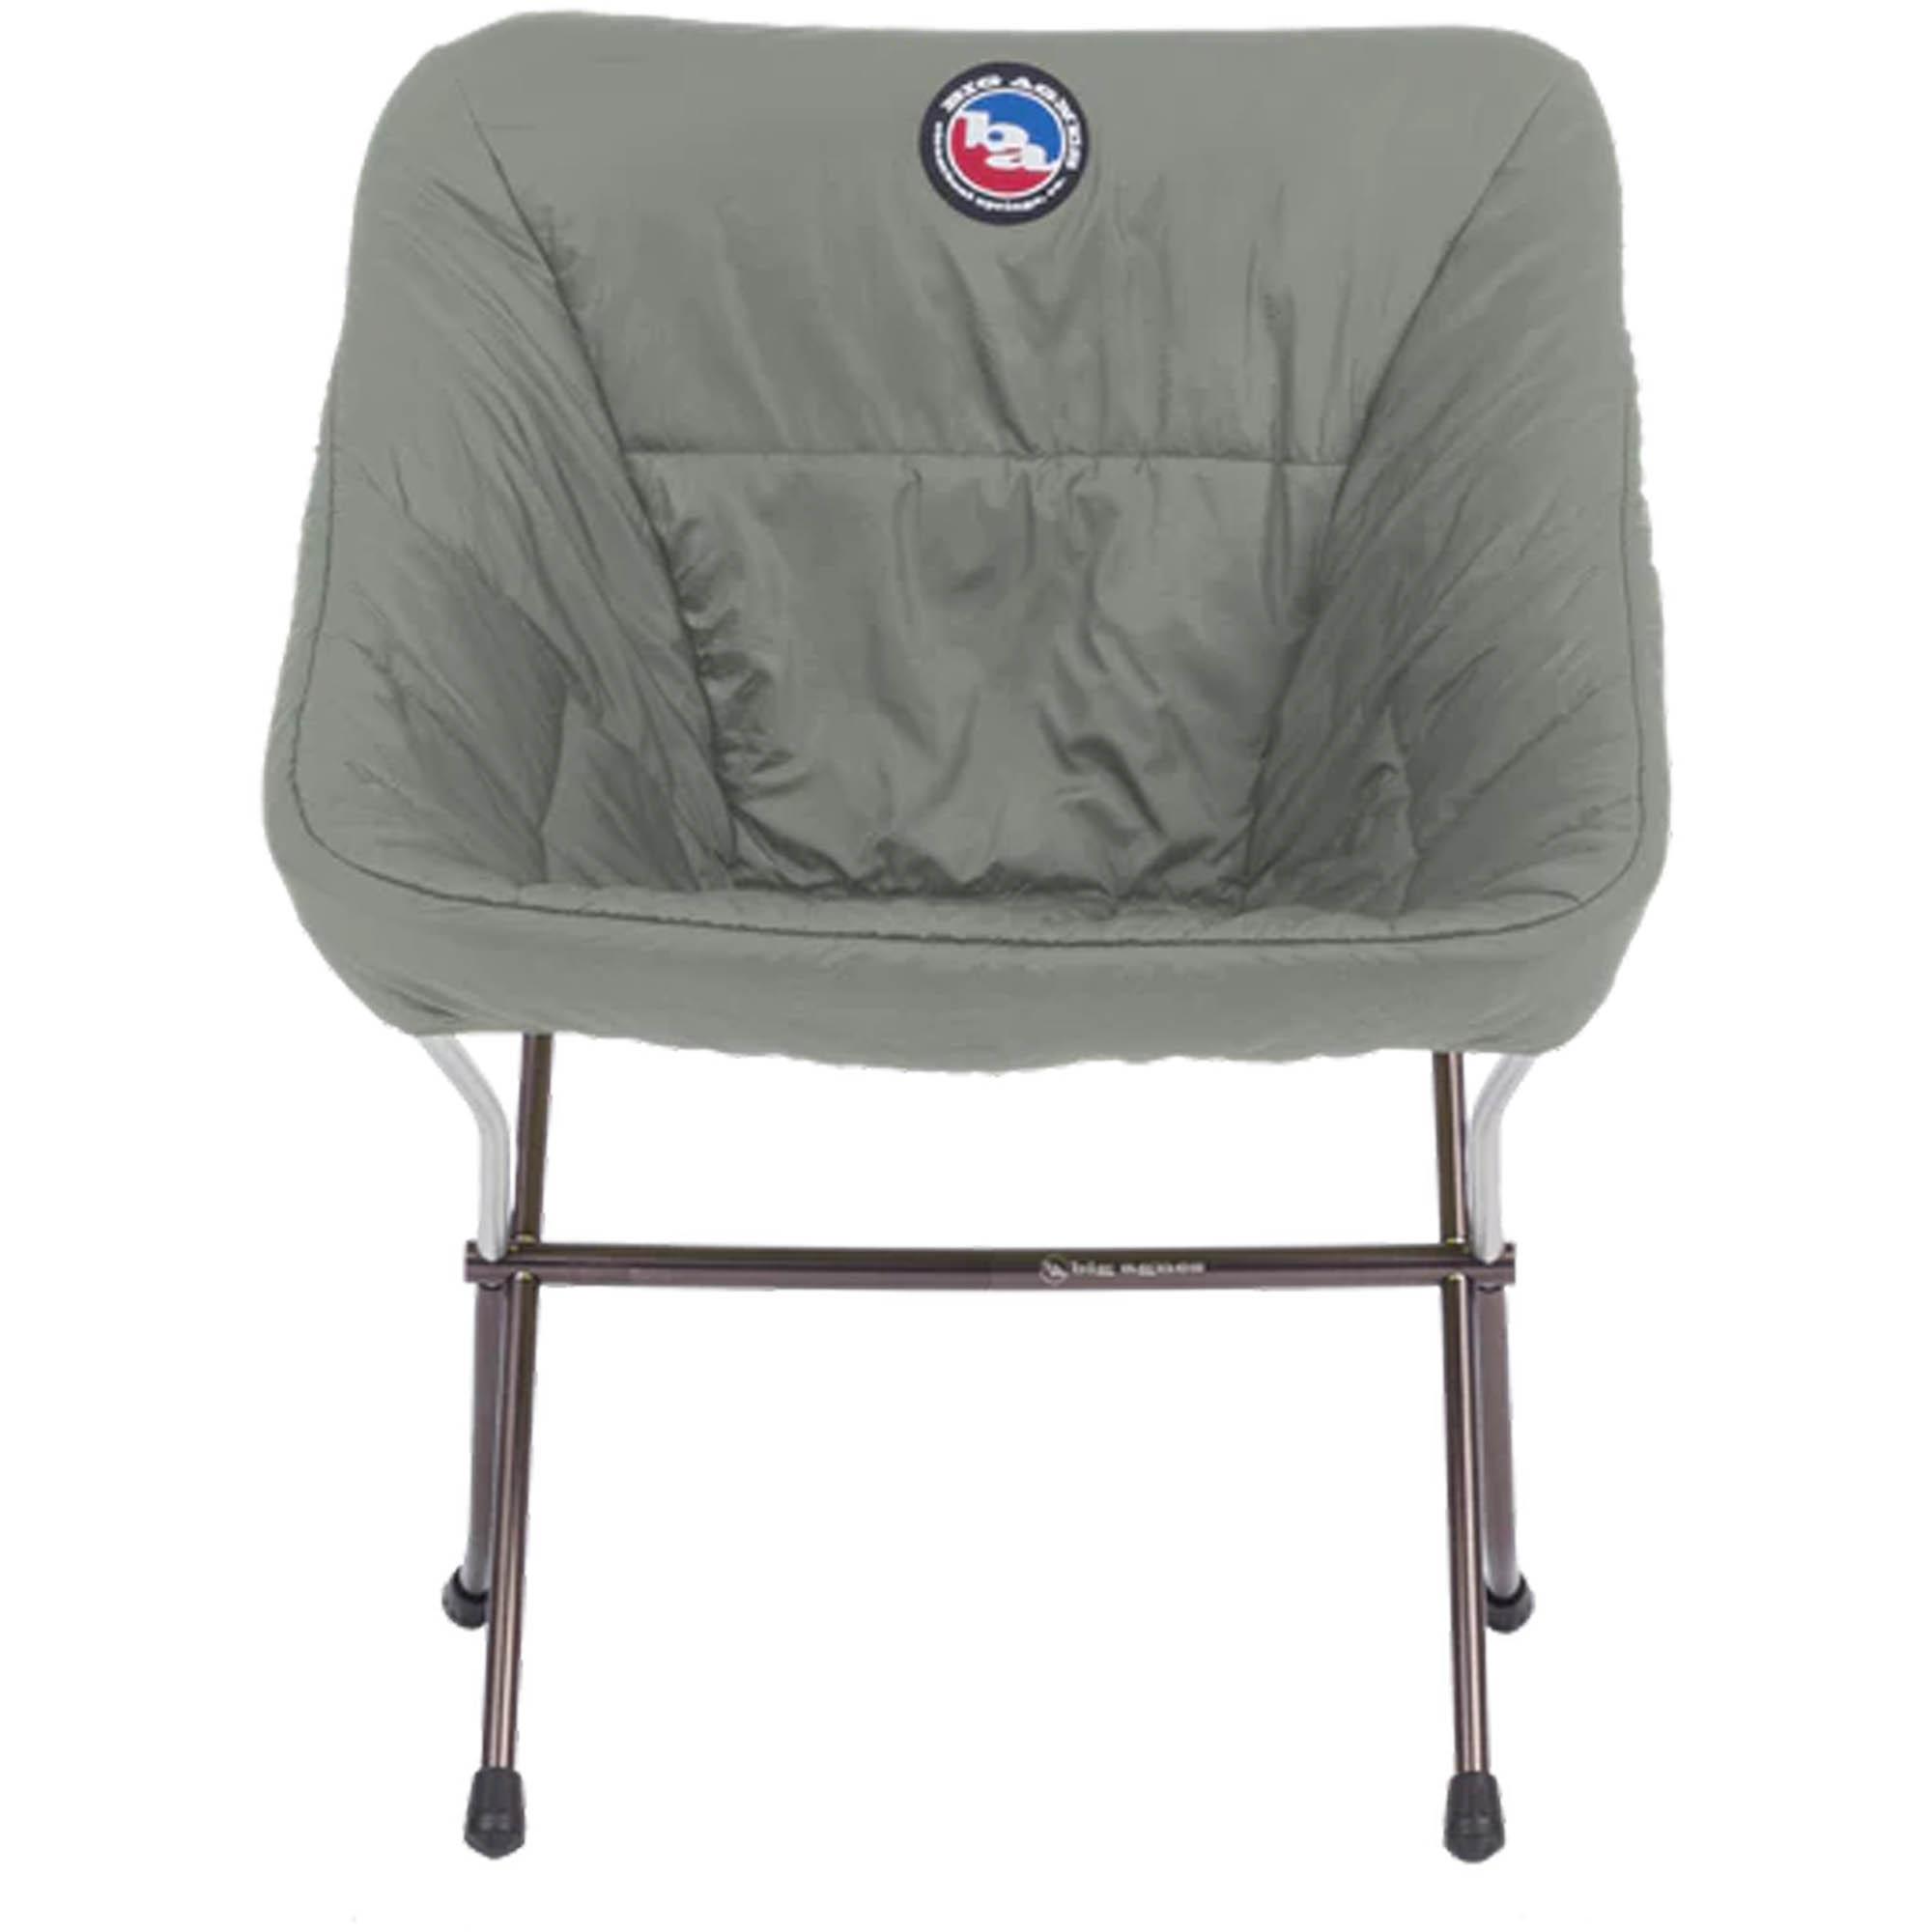 Big Agnes Mica Basin Insulated Camp Chair Cover